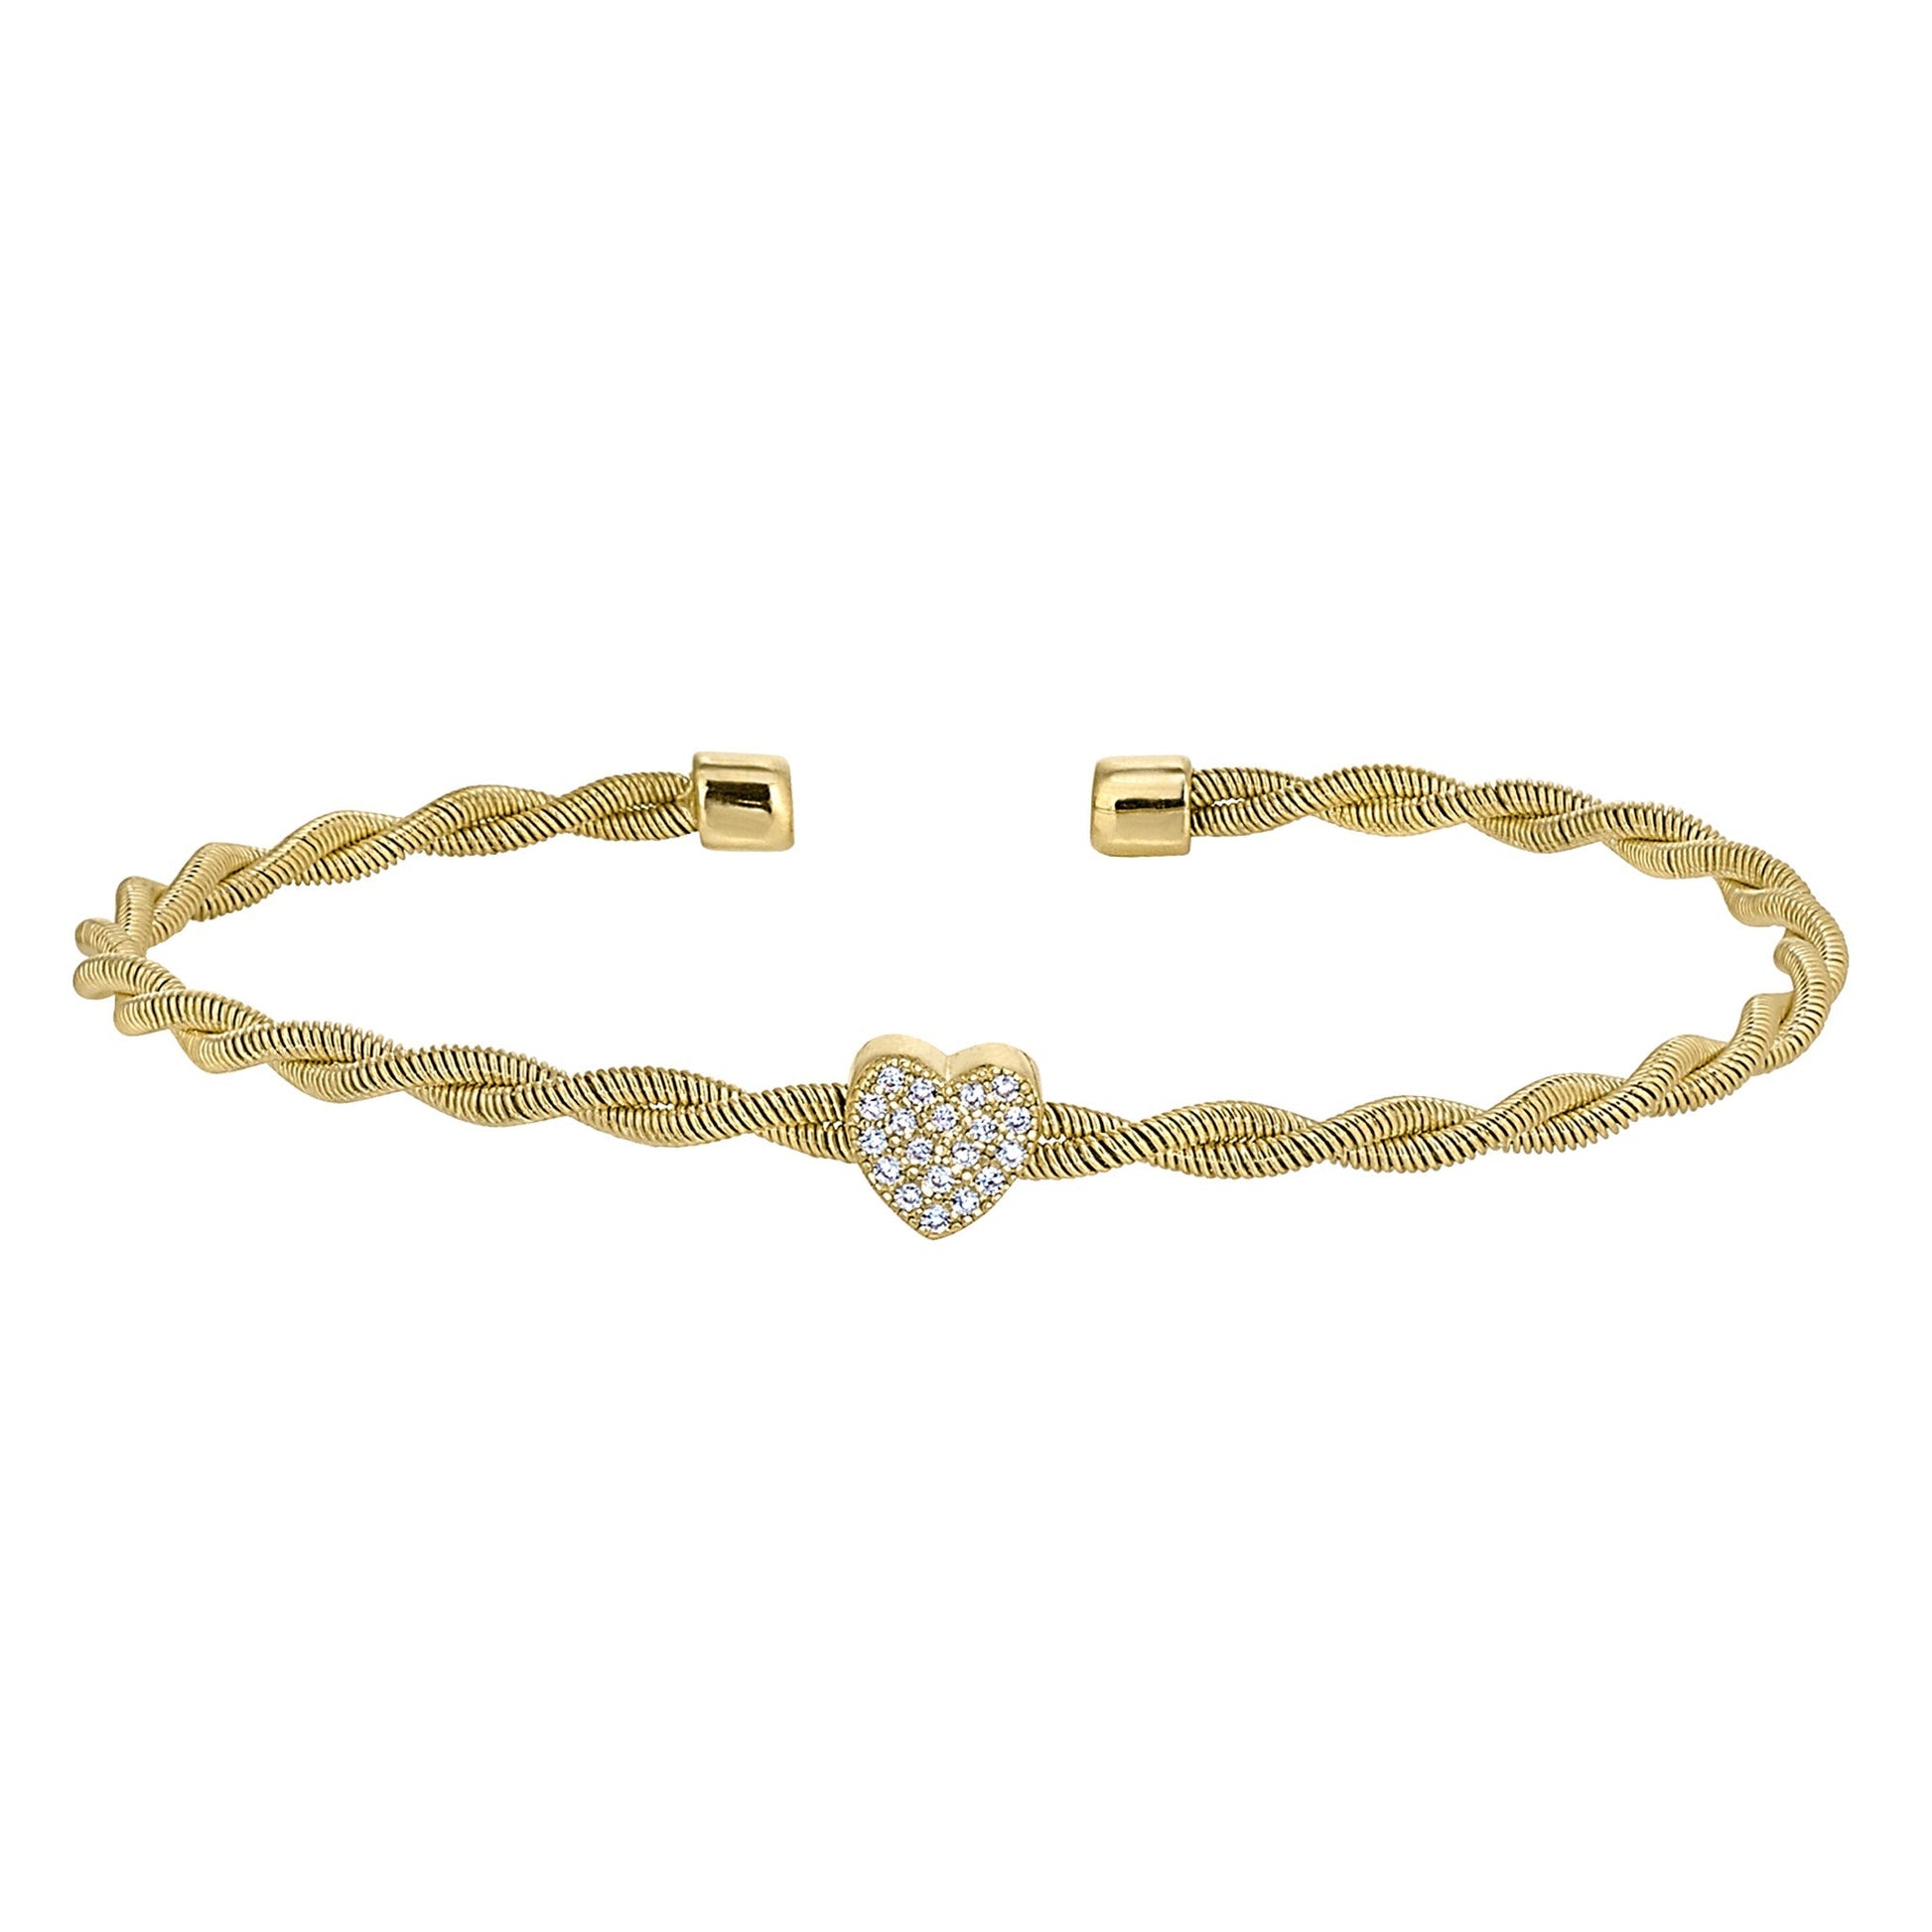 A heart accent simulated diamonds twisted cable bracelet displayed on a neutral white background.